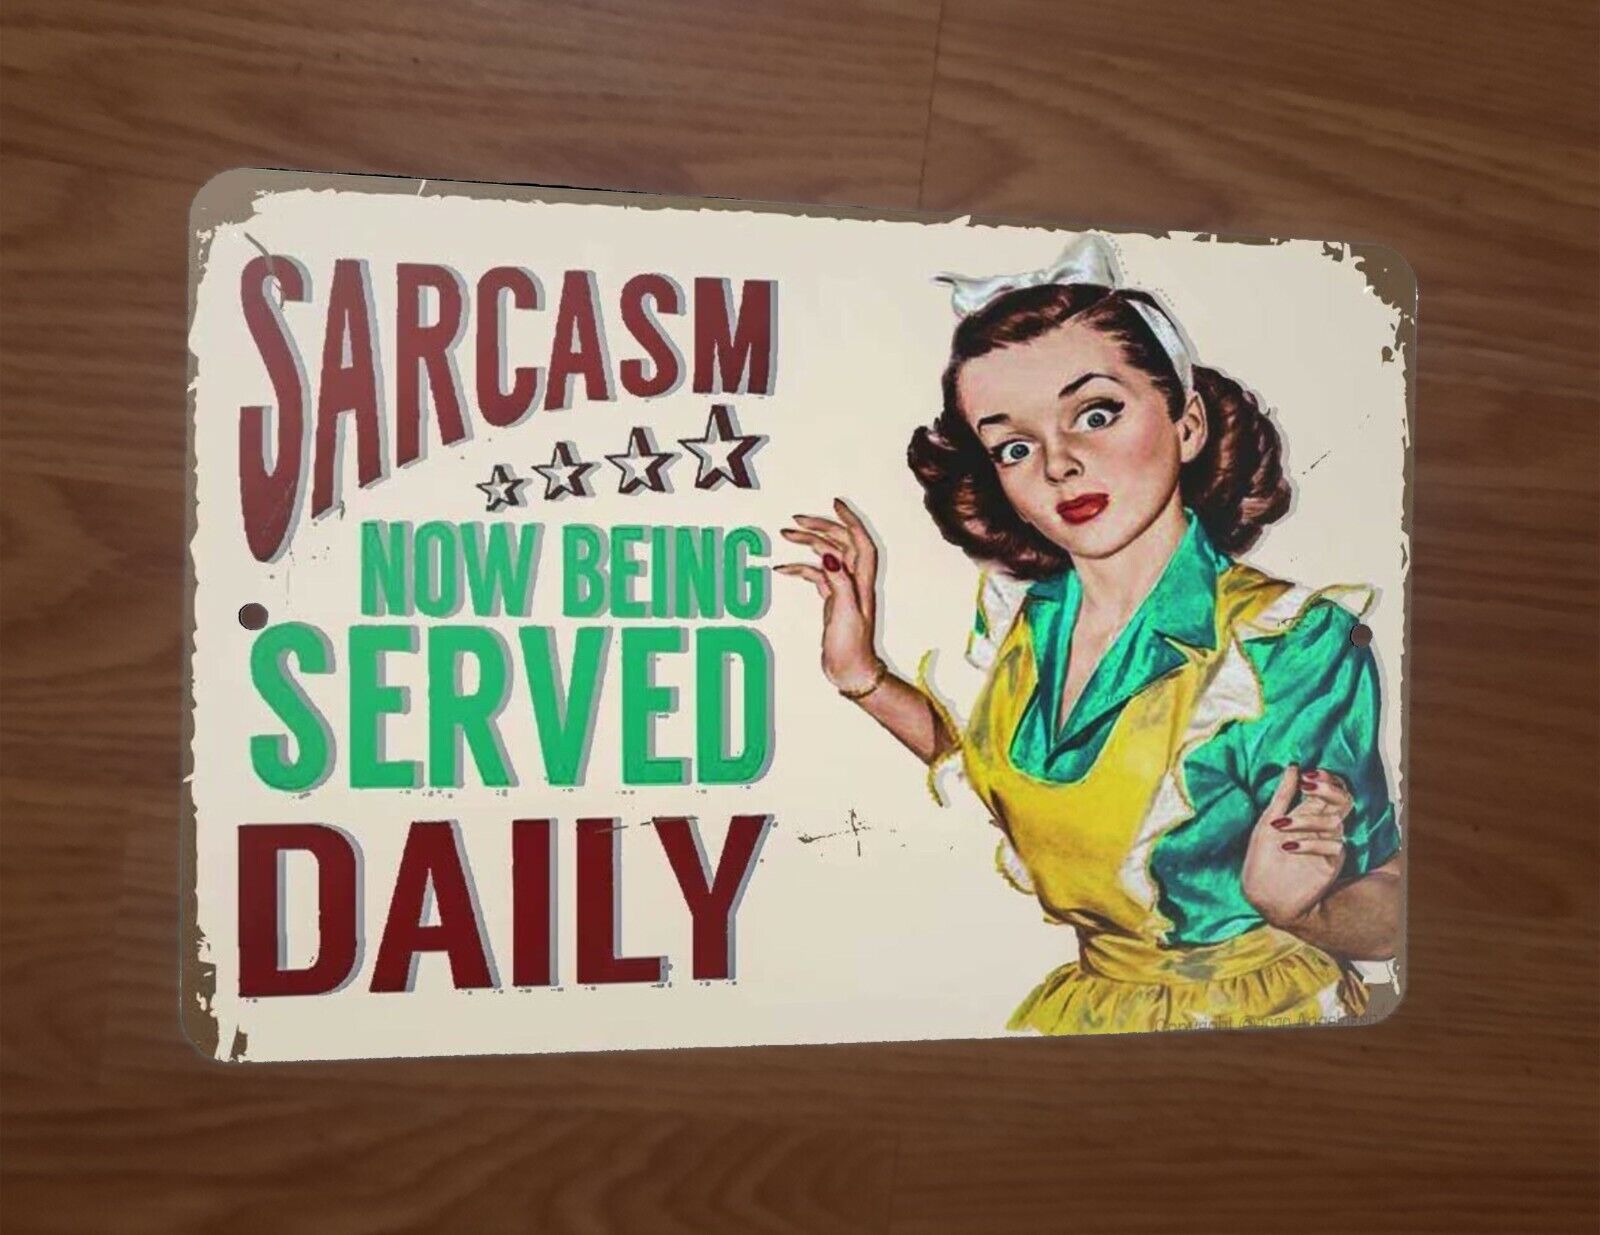 Sarcasm Now Being Served Daily 8x12 Metal Wall Sign